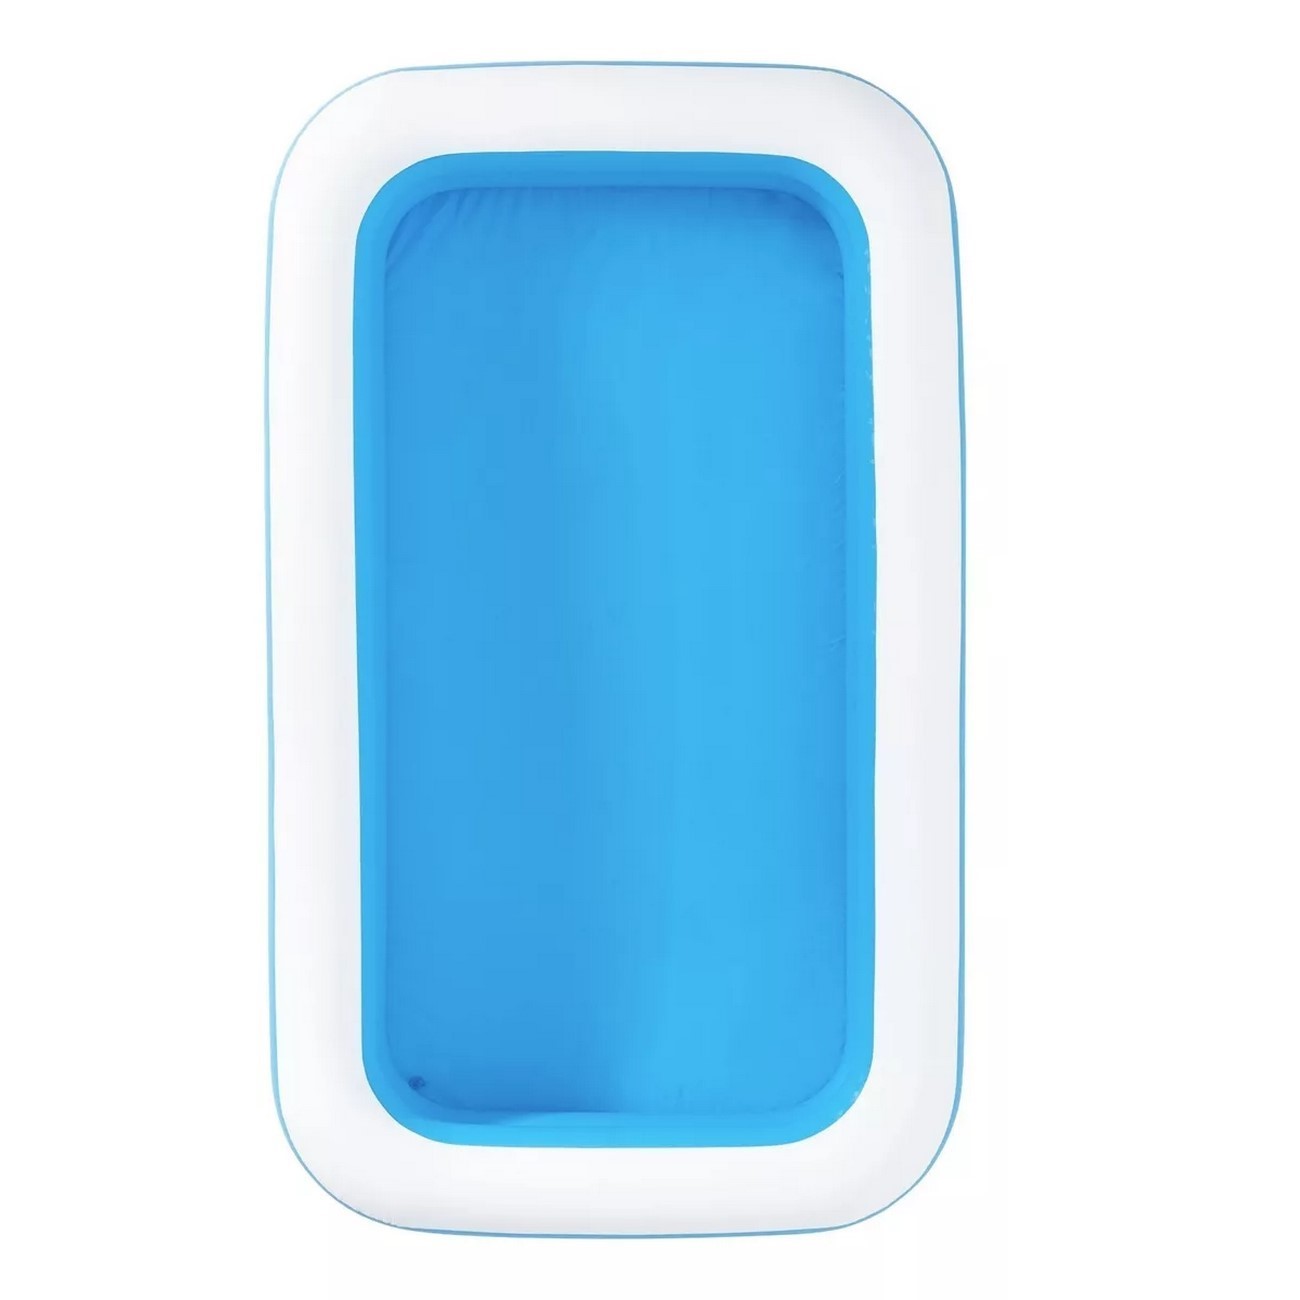 Piscina Inflable Rectangular Bestway Family Pool 54150 850 L